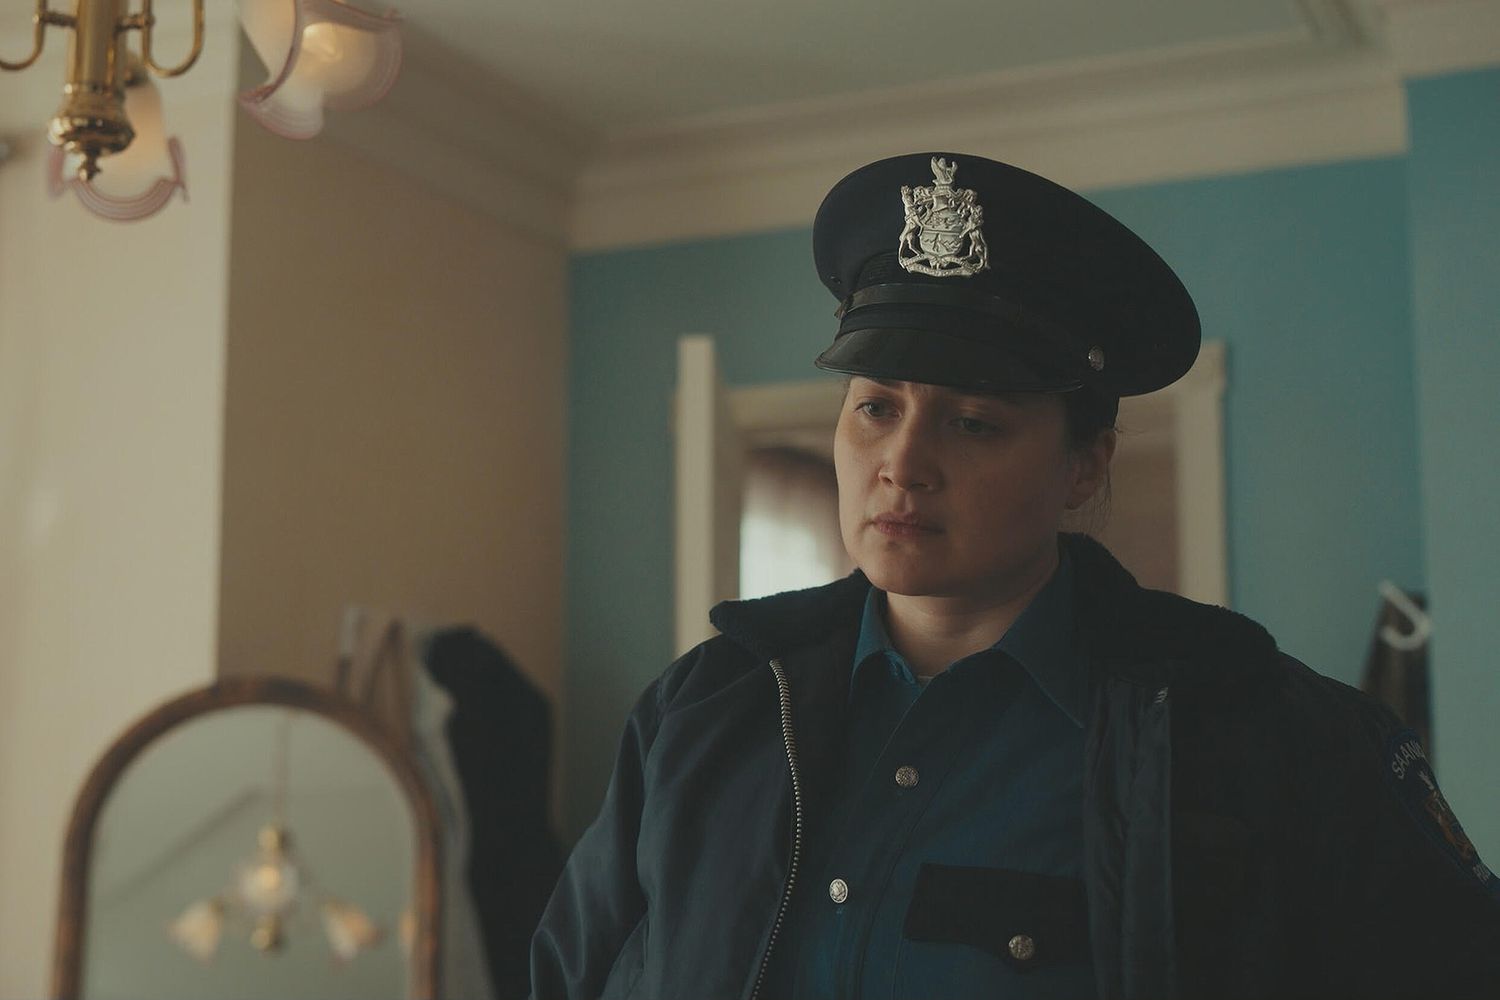 A female police officer in uniform stands inside a home in this image from Best Day Ever Productions.